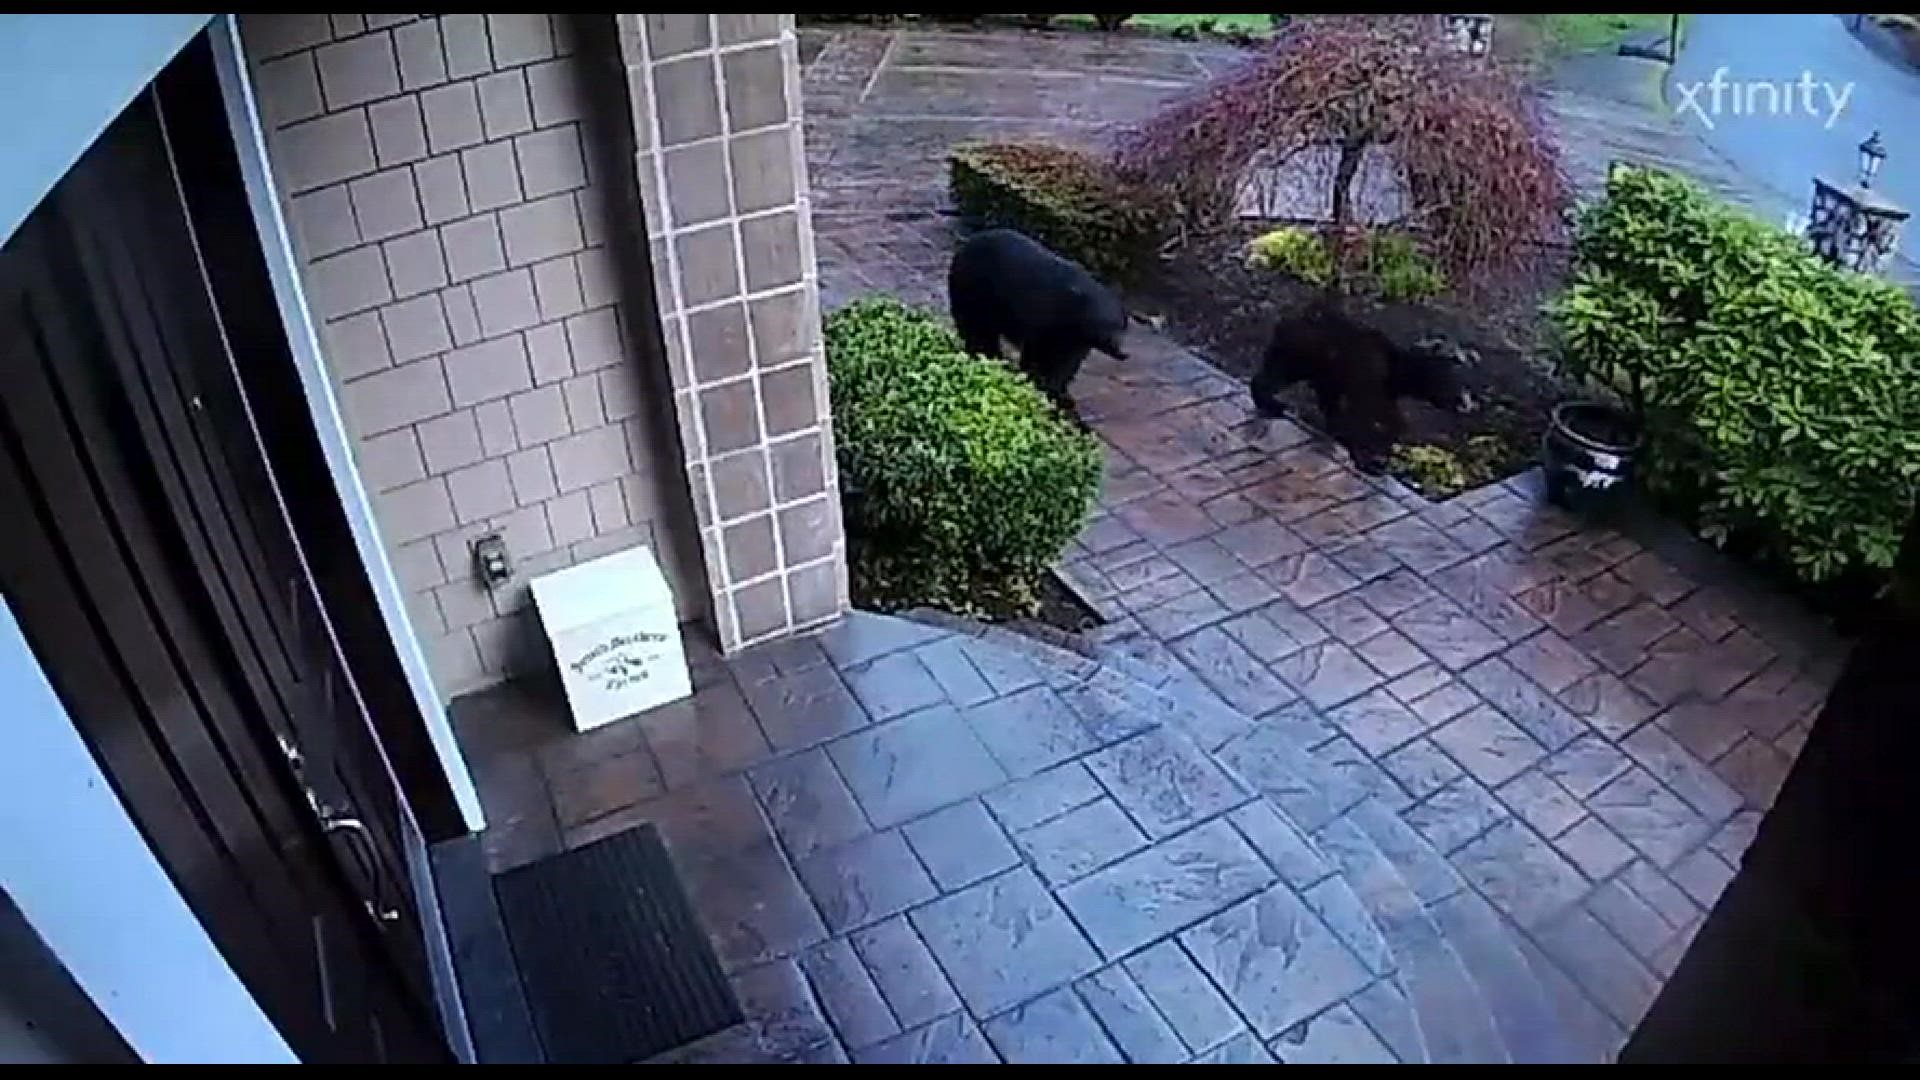 The bears were spotted on a doorbell camera of a home in the Union Hill area.